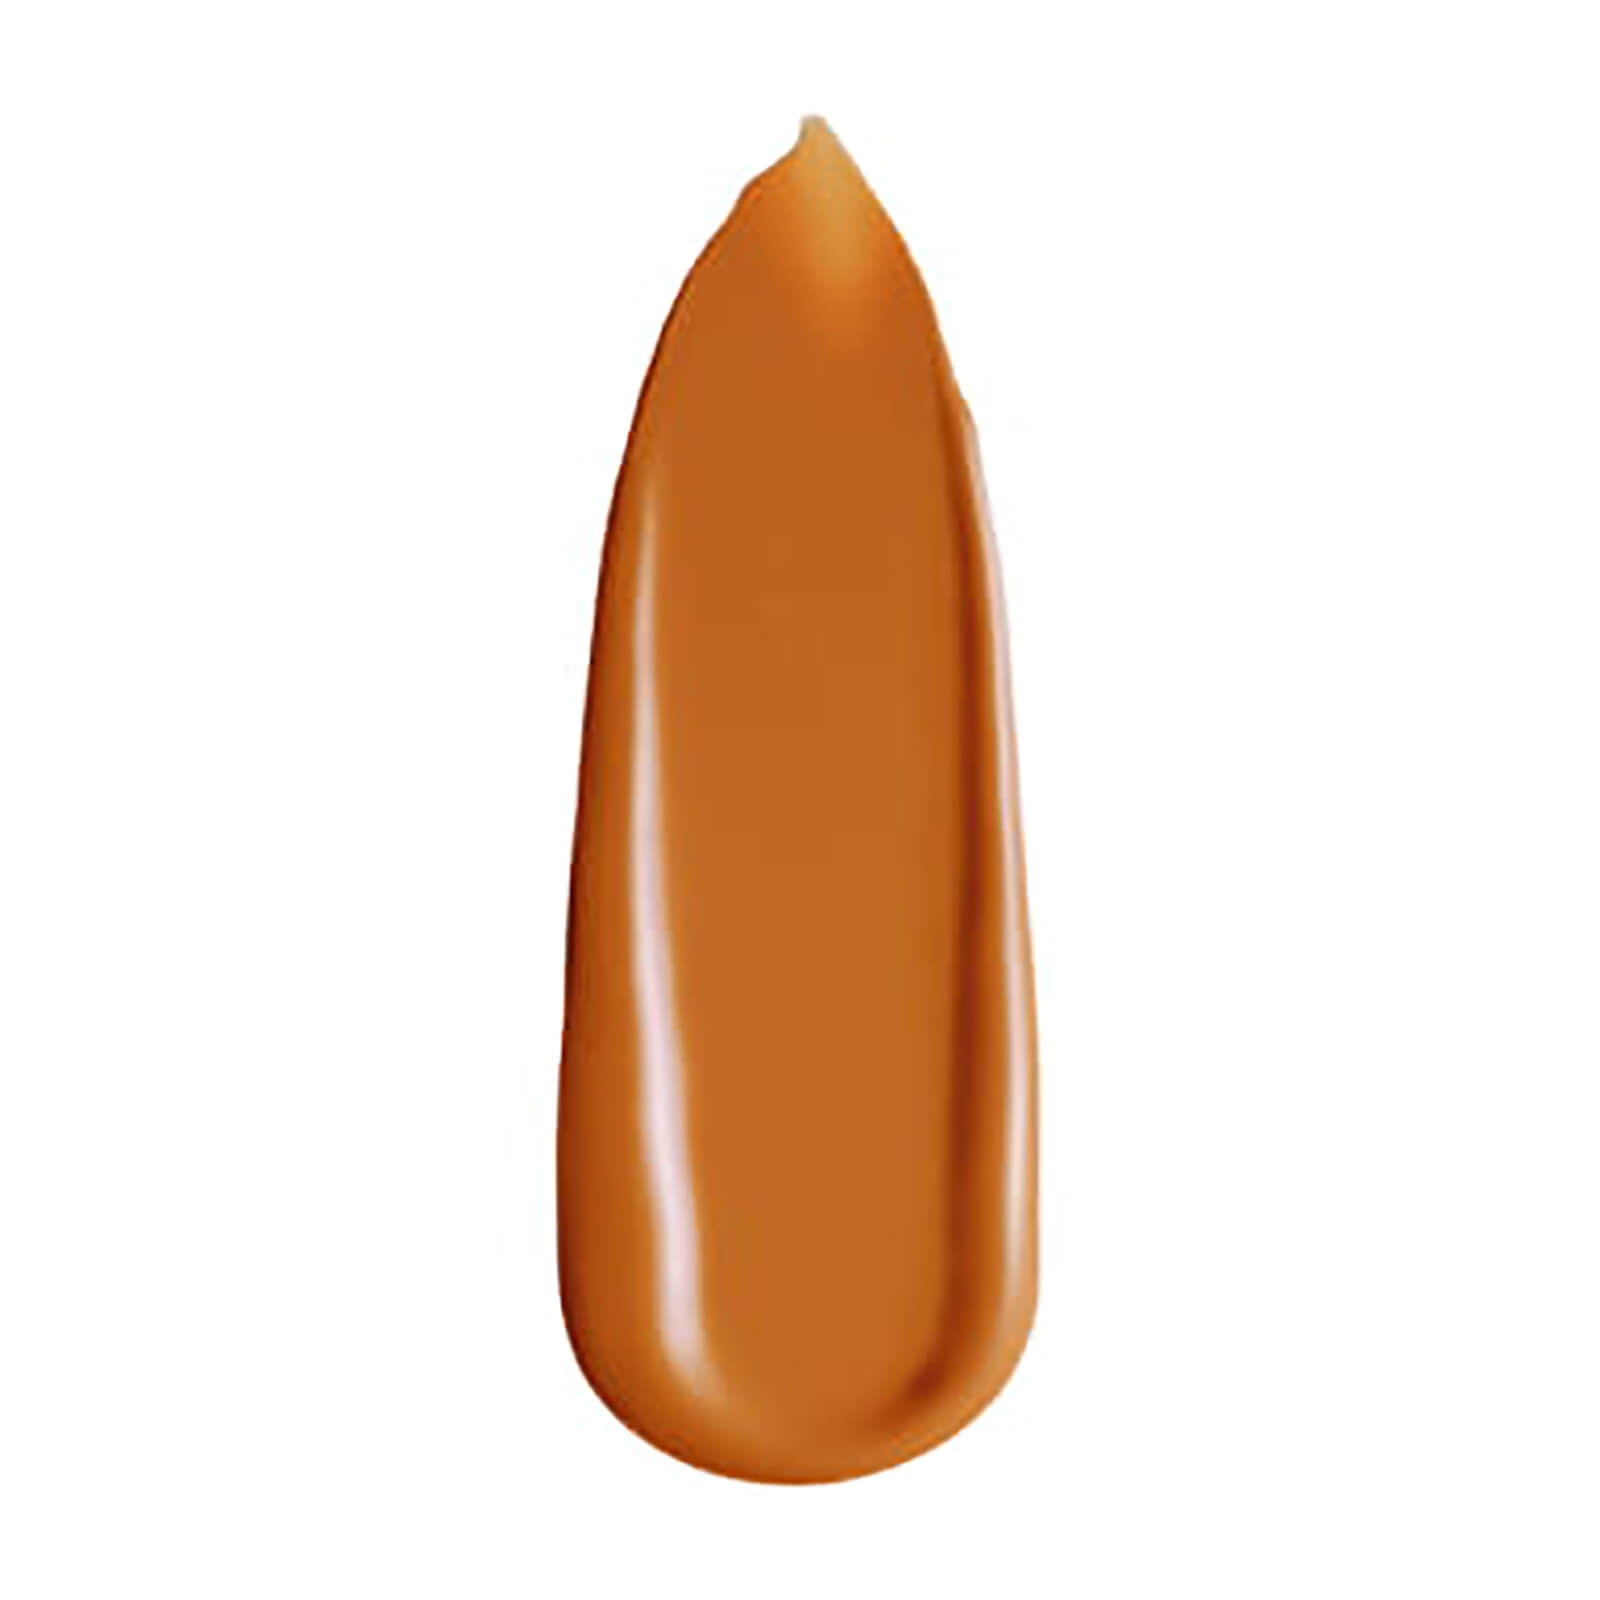 Clinique Even Better Glow™ Light Reflecting Makeup SPF15 30ml (Various Shades) - 112 Ginger